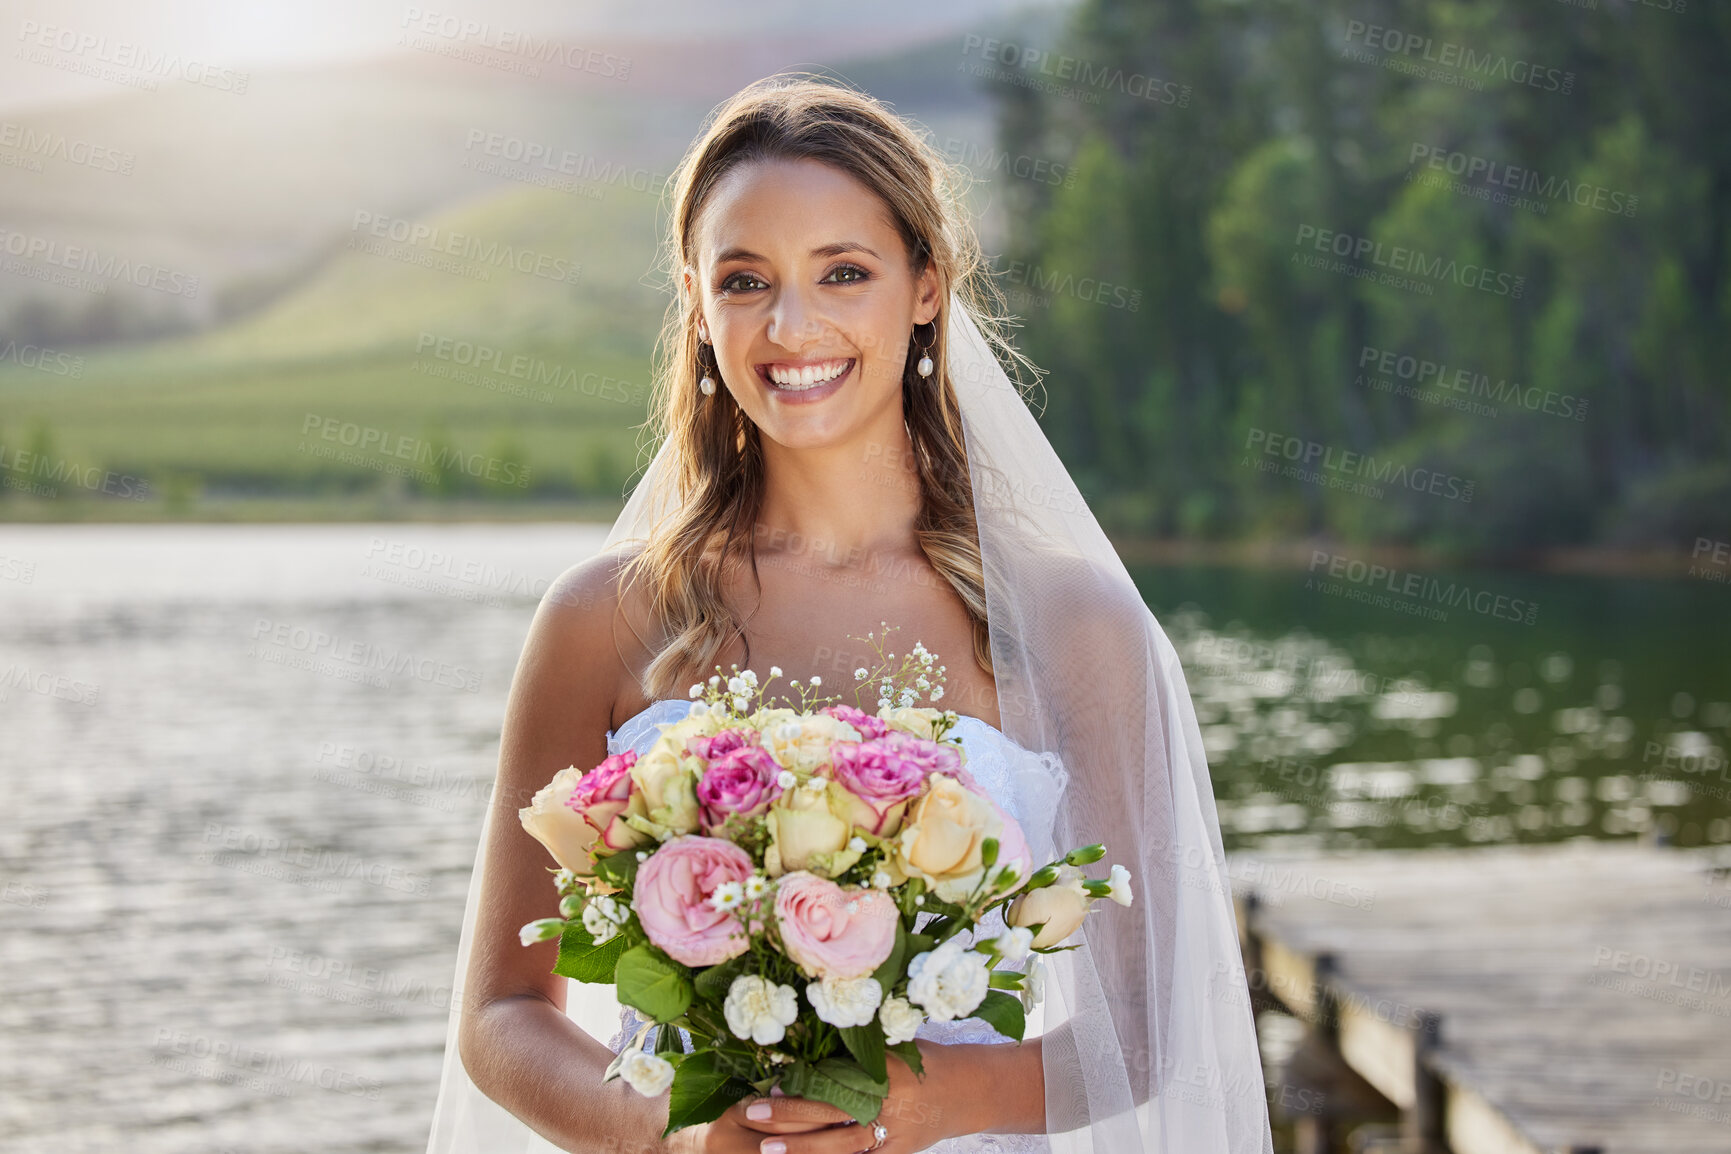 Buy stock photo Portrait, happy bride and bouquet at lake, nature and celebration of commitment, union and marriage. Woman, smile and outdoor wedding of flowers, bridal fashion and excited to celebrate beautiful day